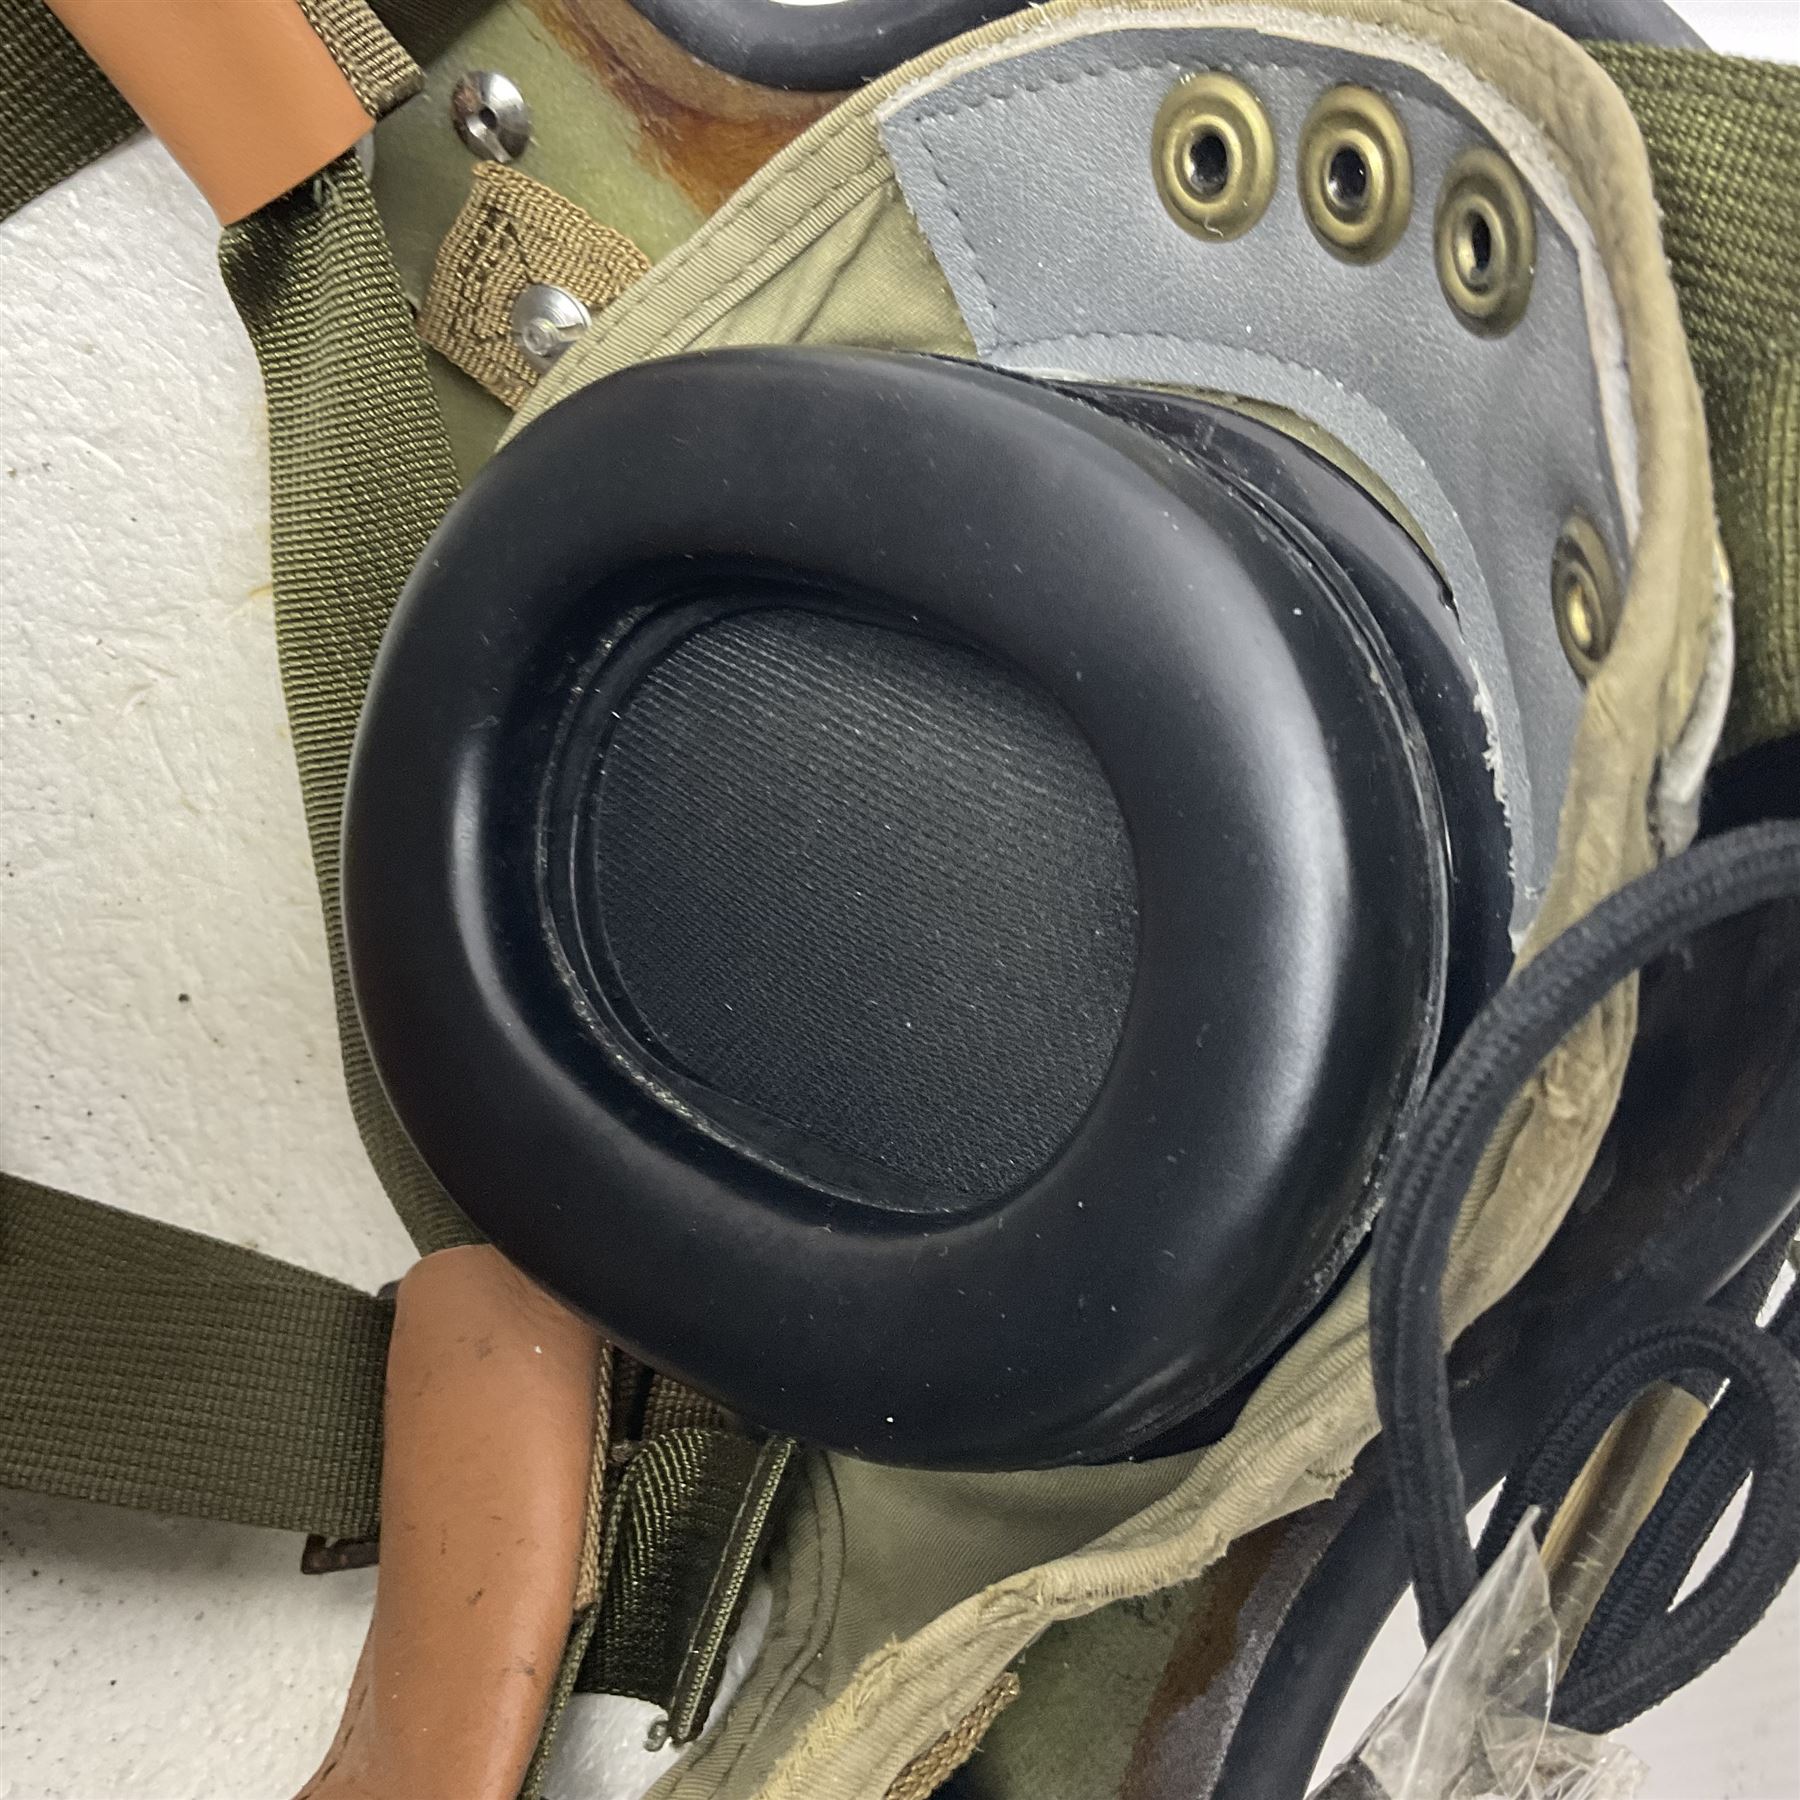 Silver grey SPH-4B Flight Helmet as used by helicopter pilots in the USAF and US Army in the 1990s; - Image 13 of 20